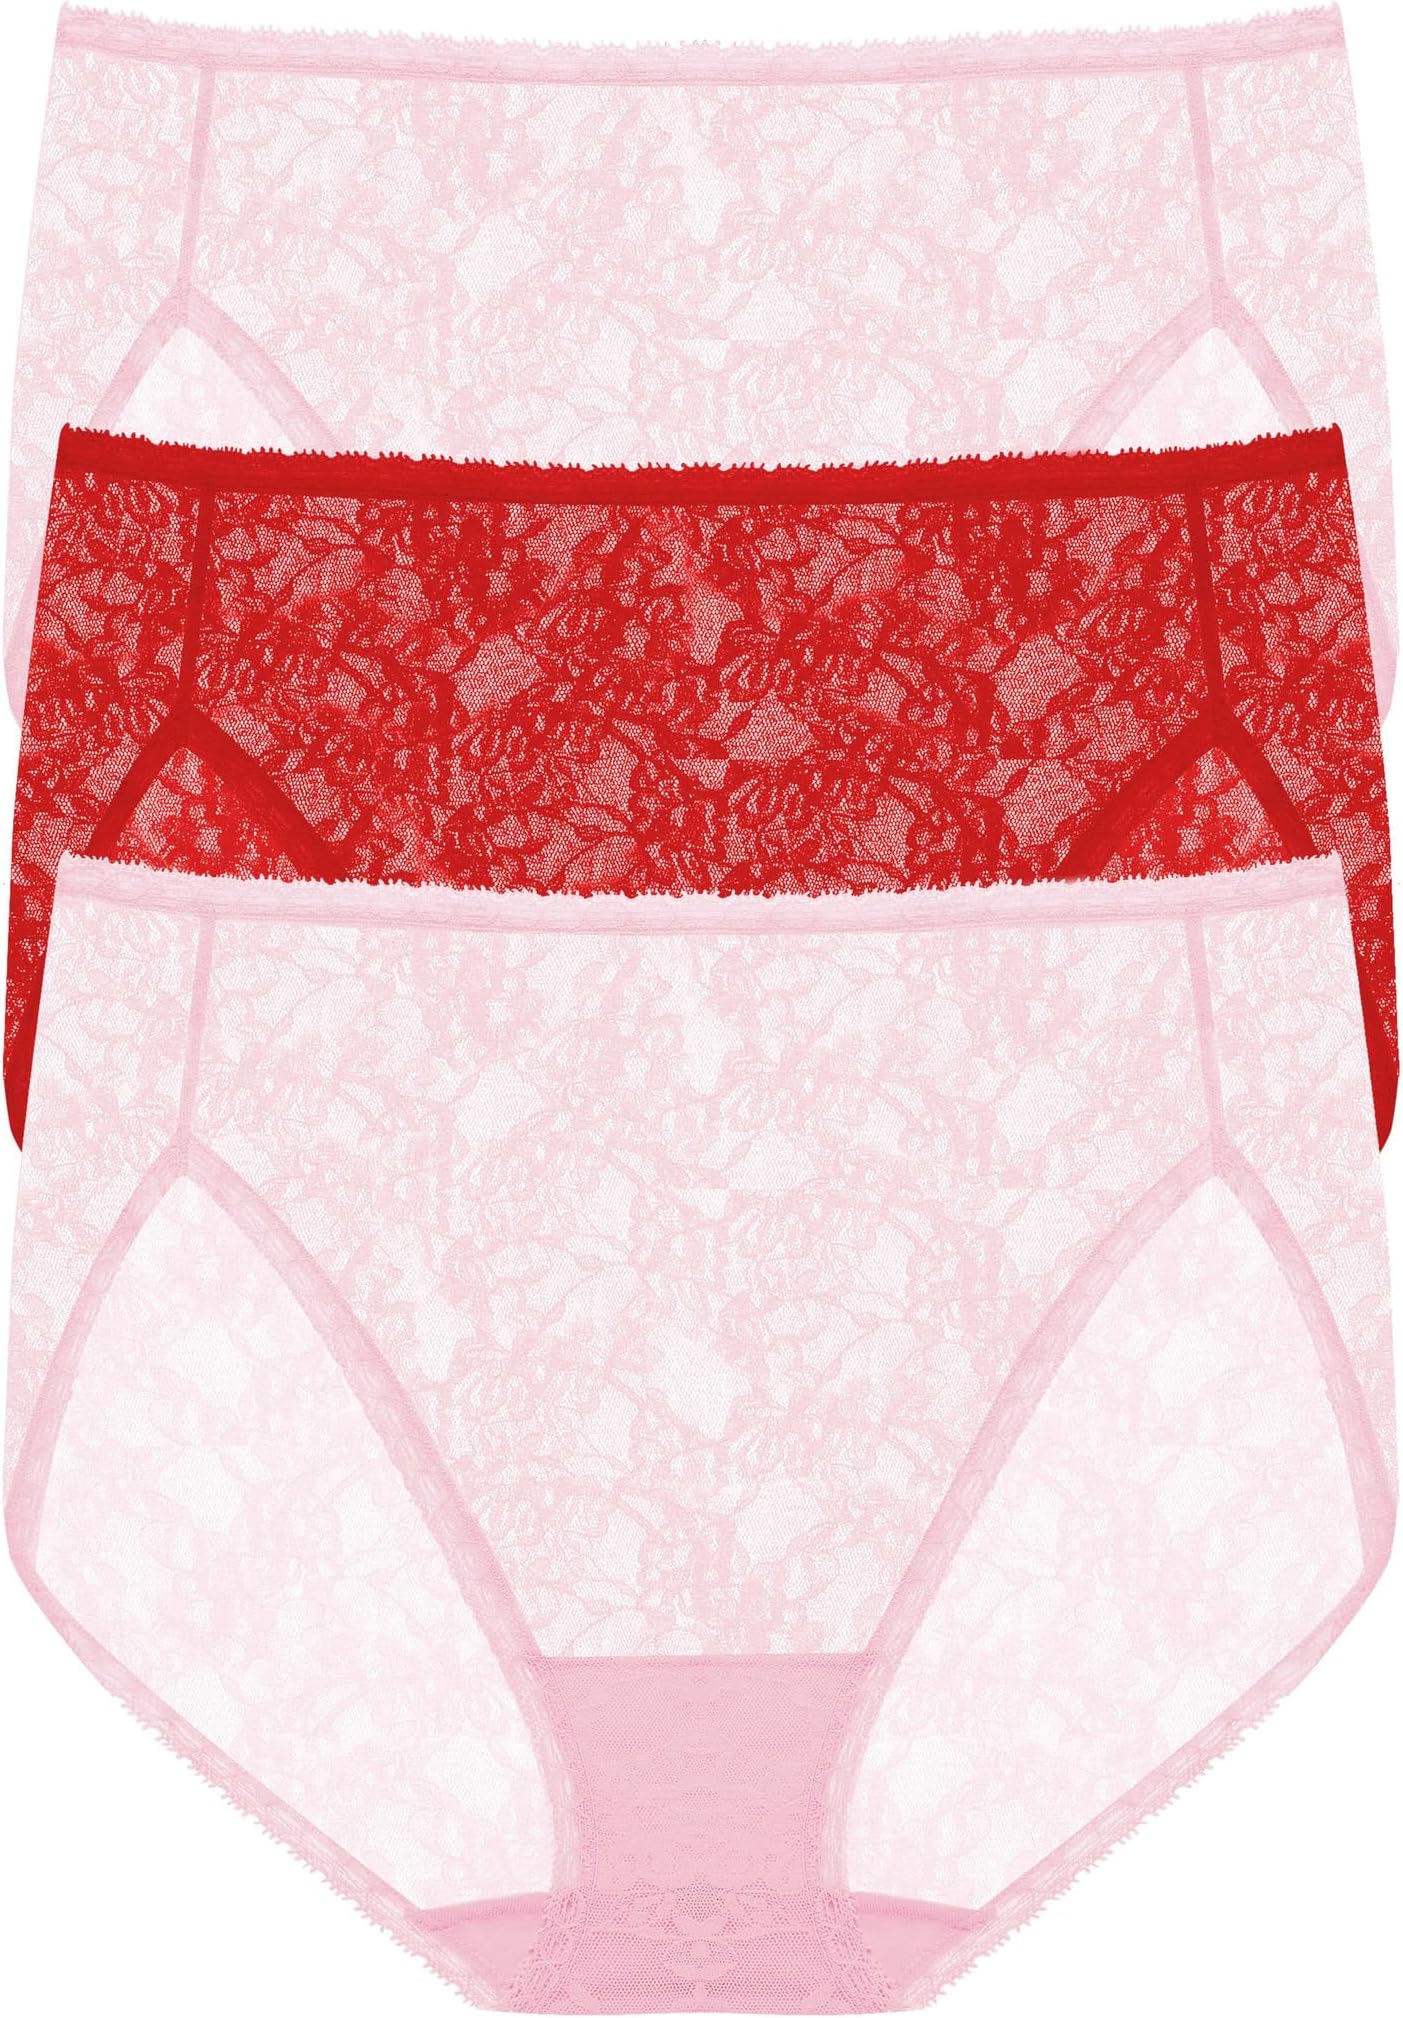 Blisss Allure French Cut, 3 шт. Natori, цвет Pink Suede/Poinsettia/Pink Suede